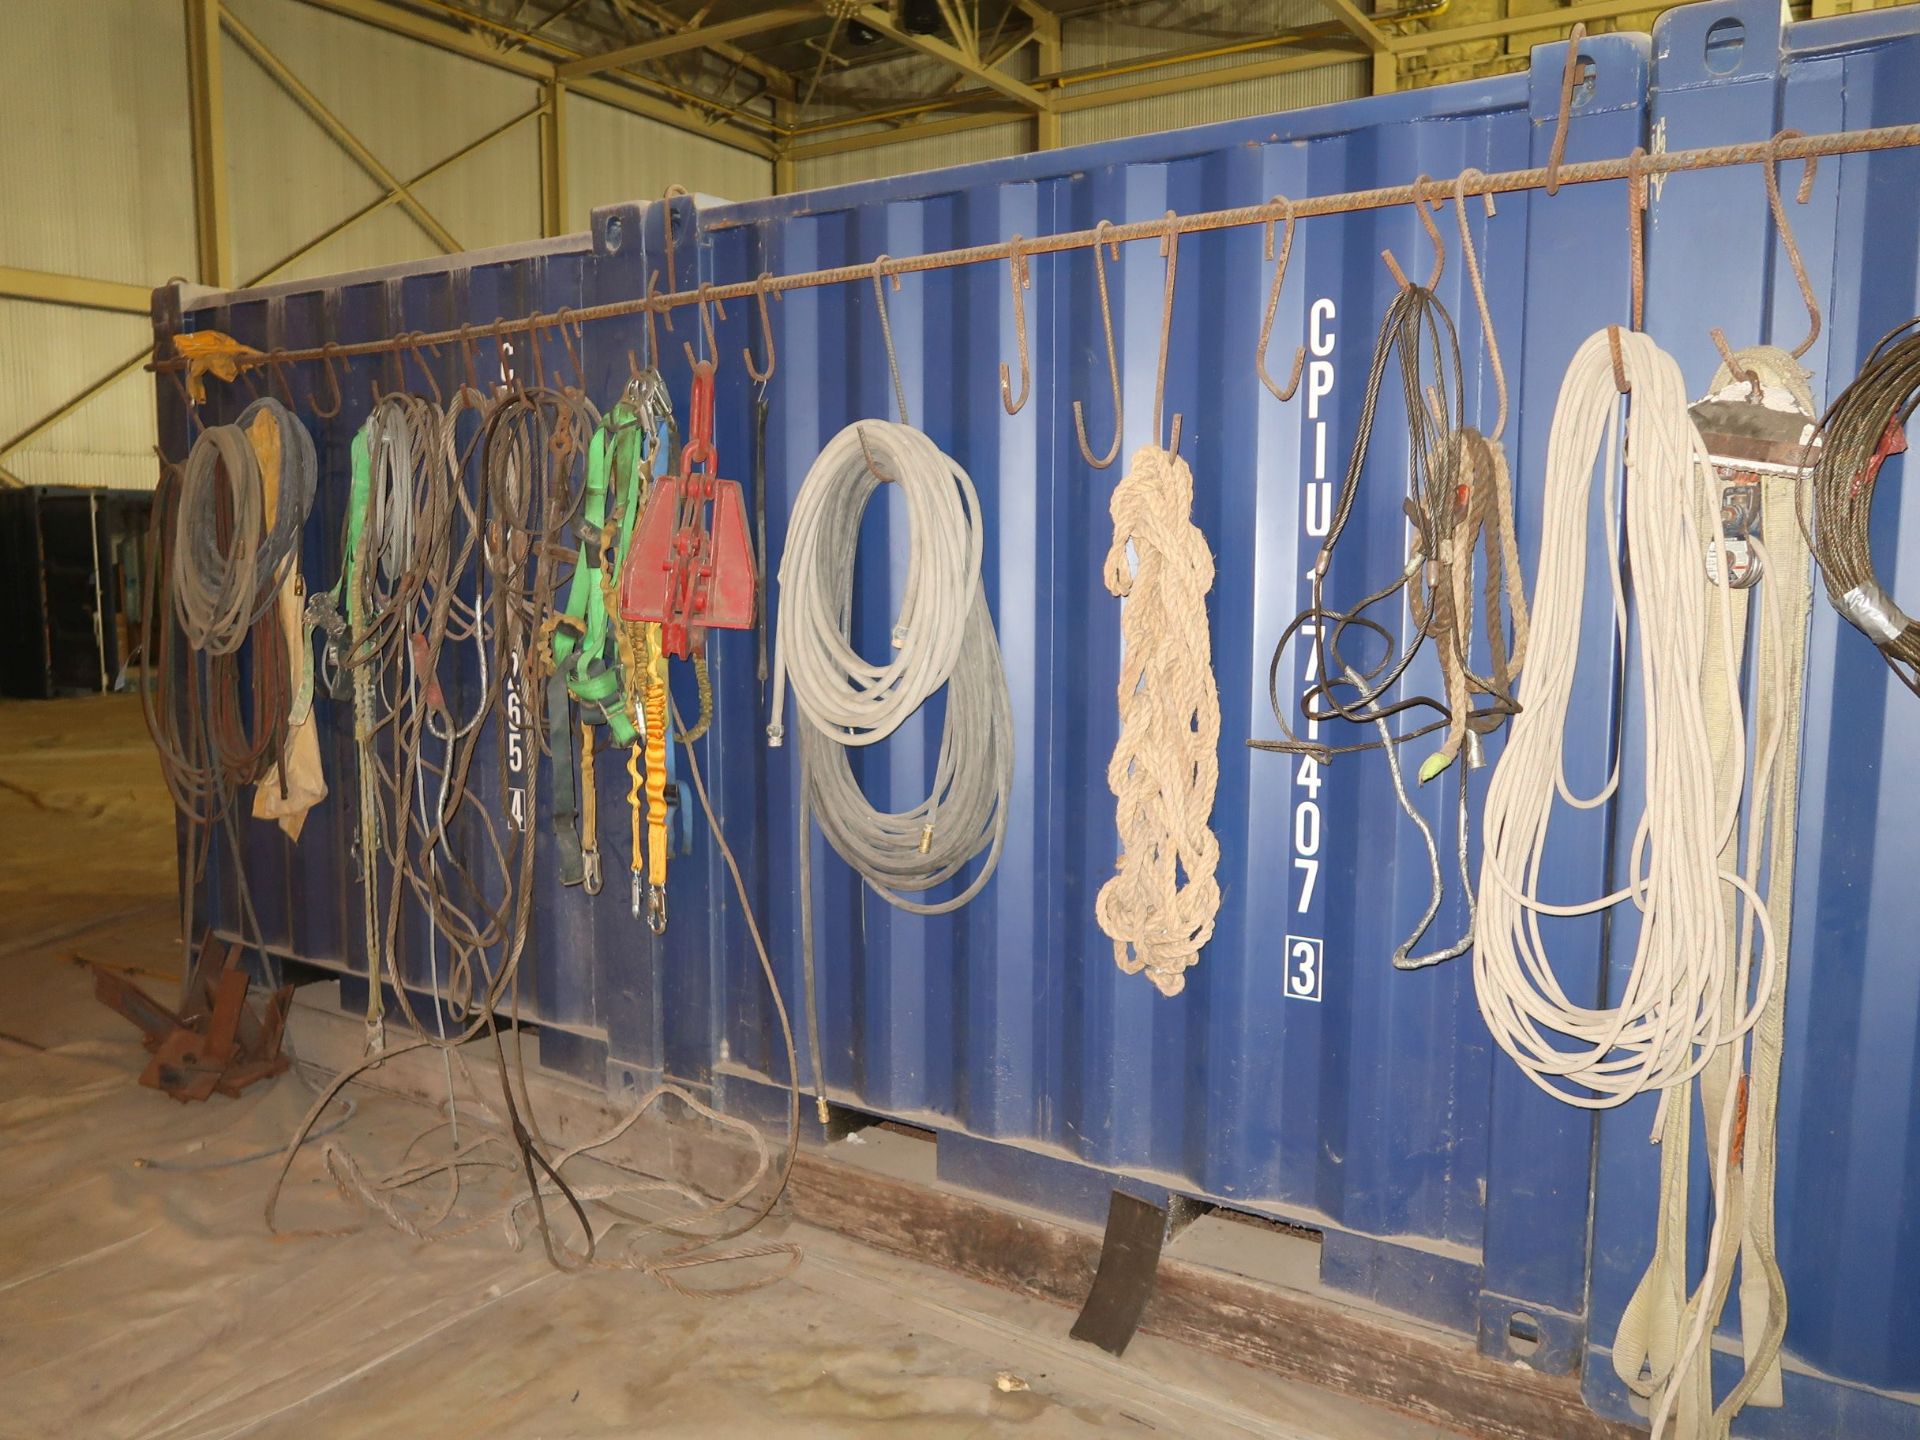 CONTENTS OF REAR OF CONTAINER INCLUDING HOSES, LIFTING STRAPS AND CABLES, SAFETY HARNESSES - Image 2 of 3